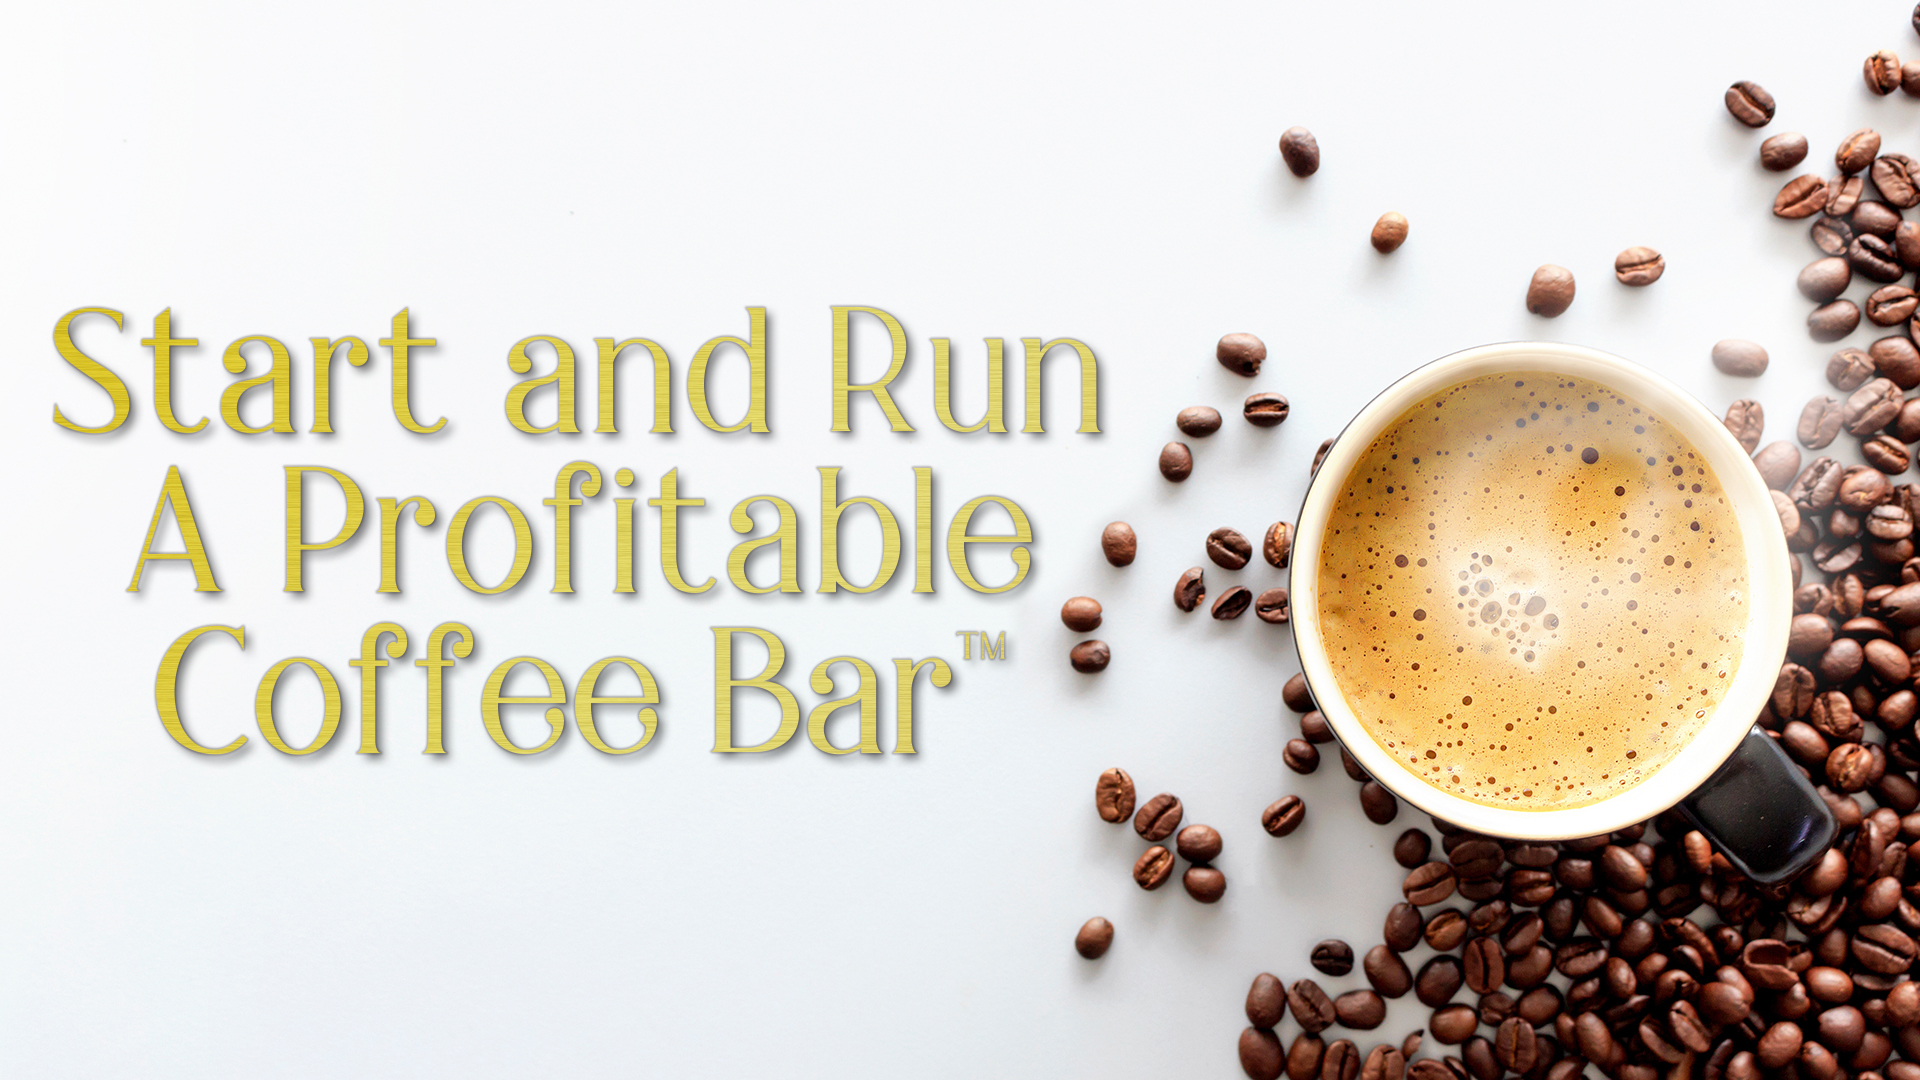 Start and Run A Profitable Coffee Bar Home Page